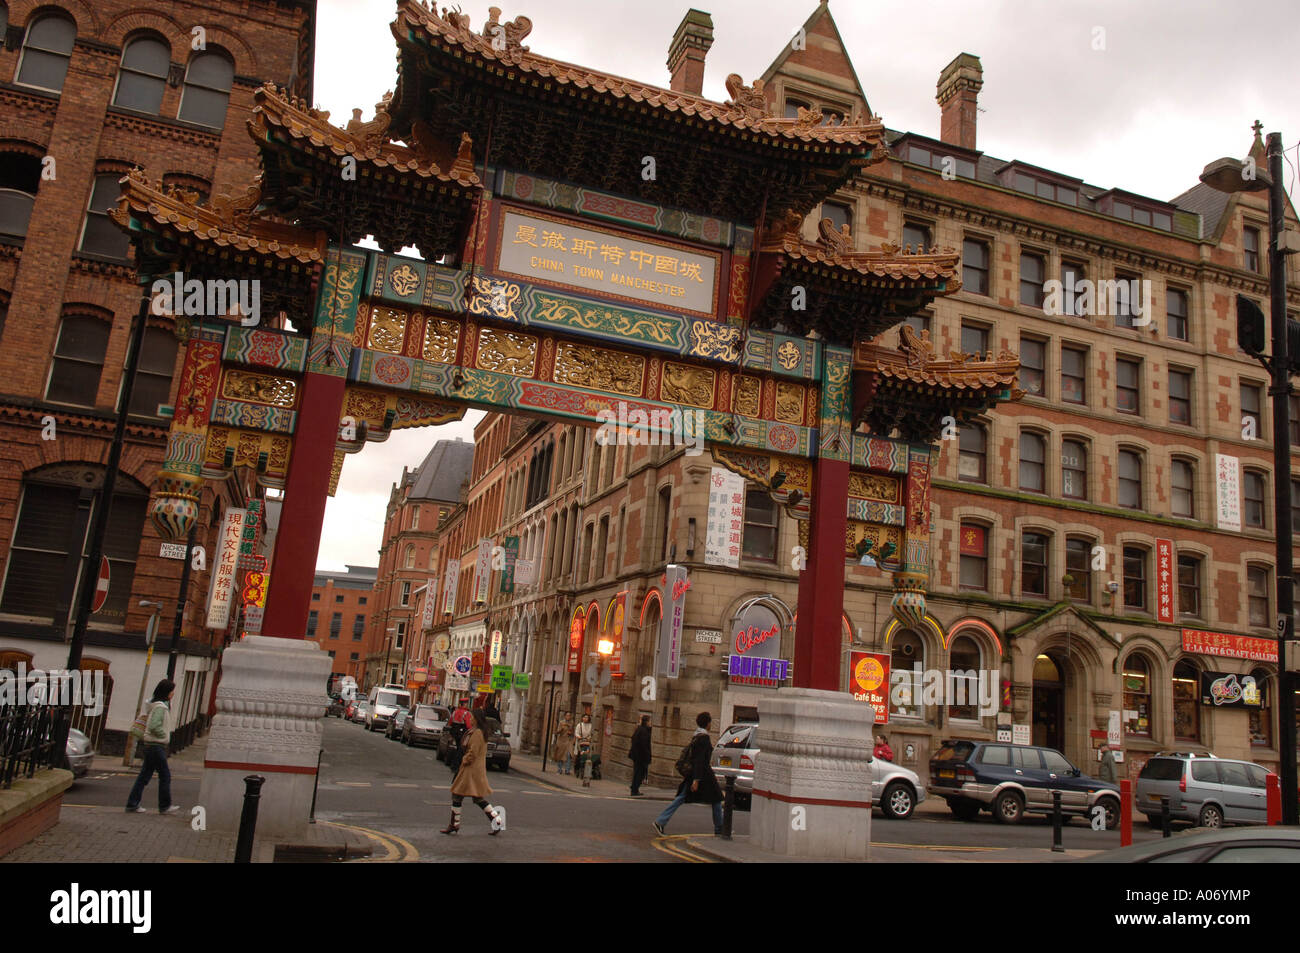 Copyright Photograph by Howard Barlow Manchester s CHINATOWN Stock Photo